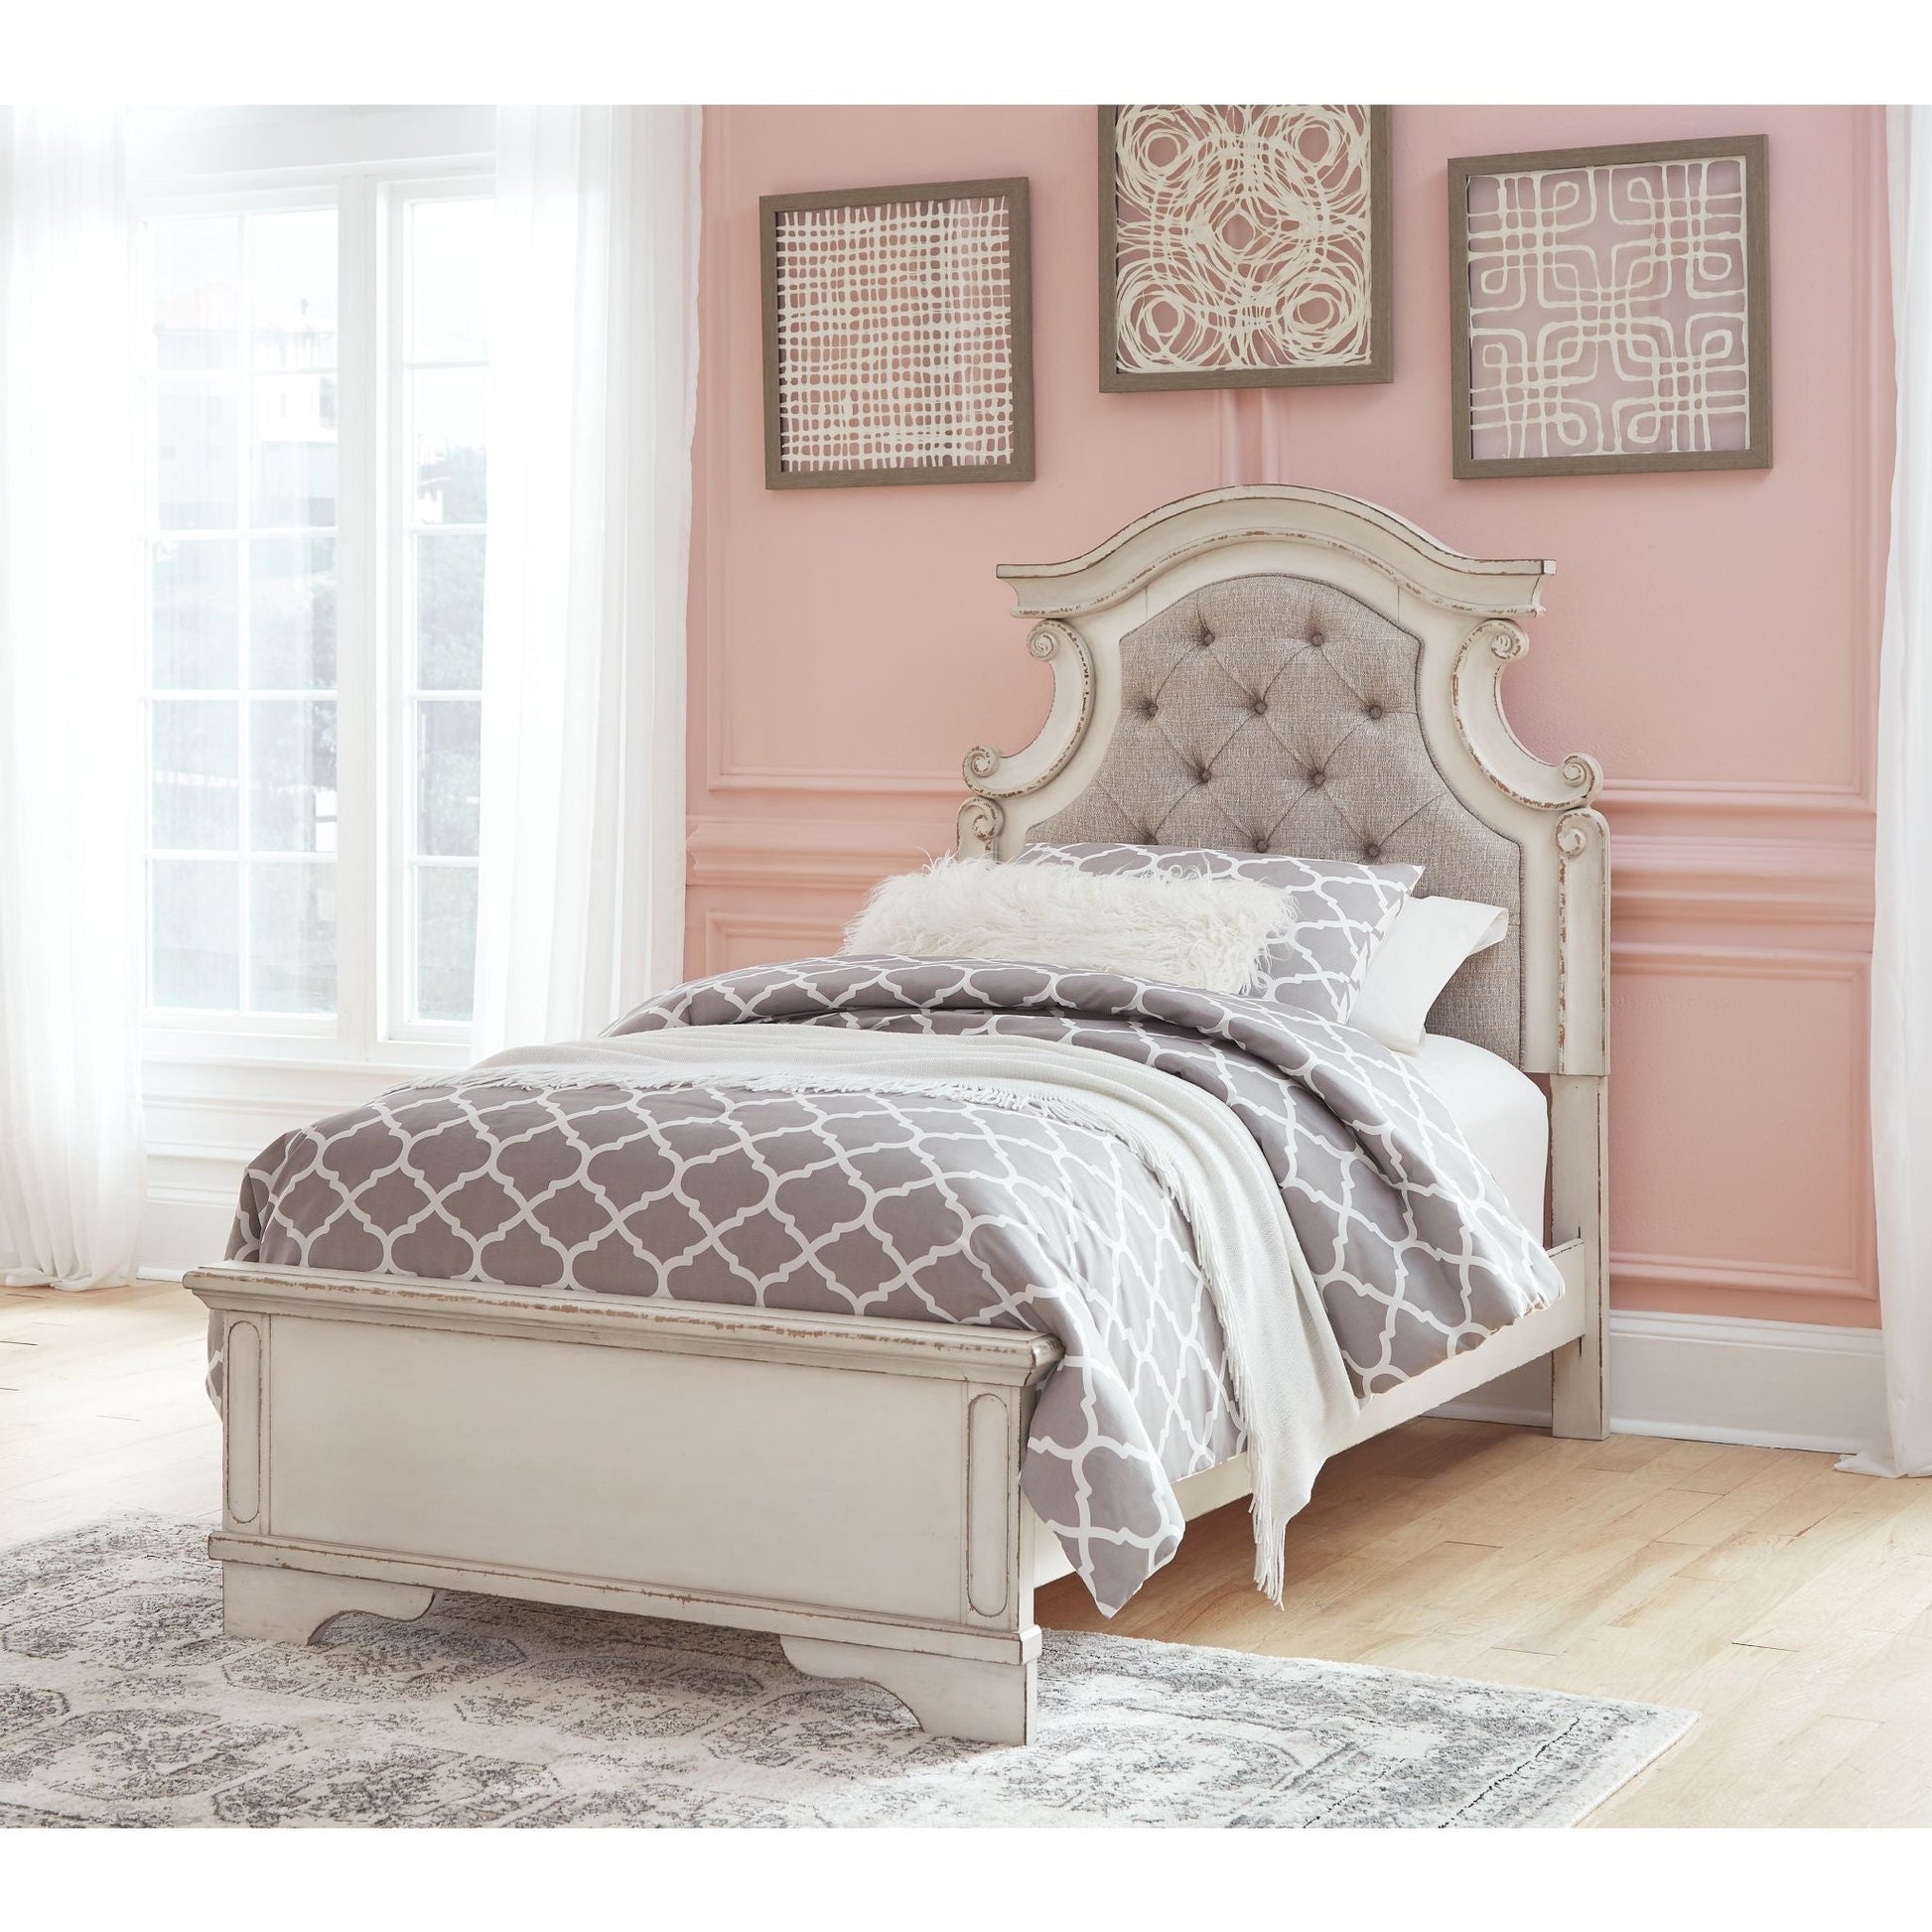 Realyn Twin Bed - Chipped White